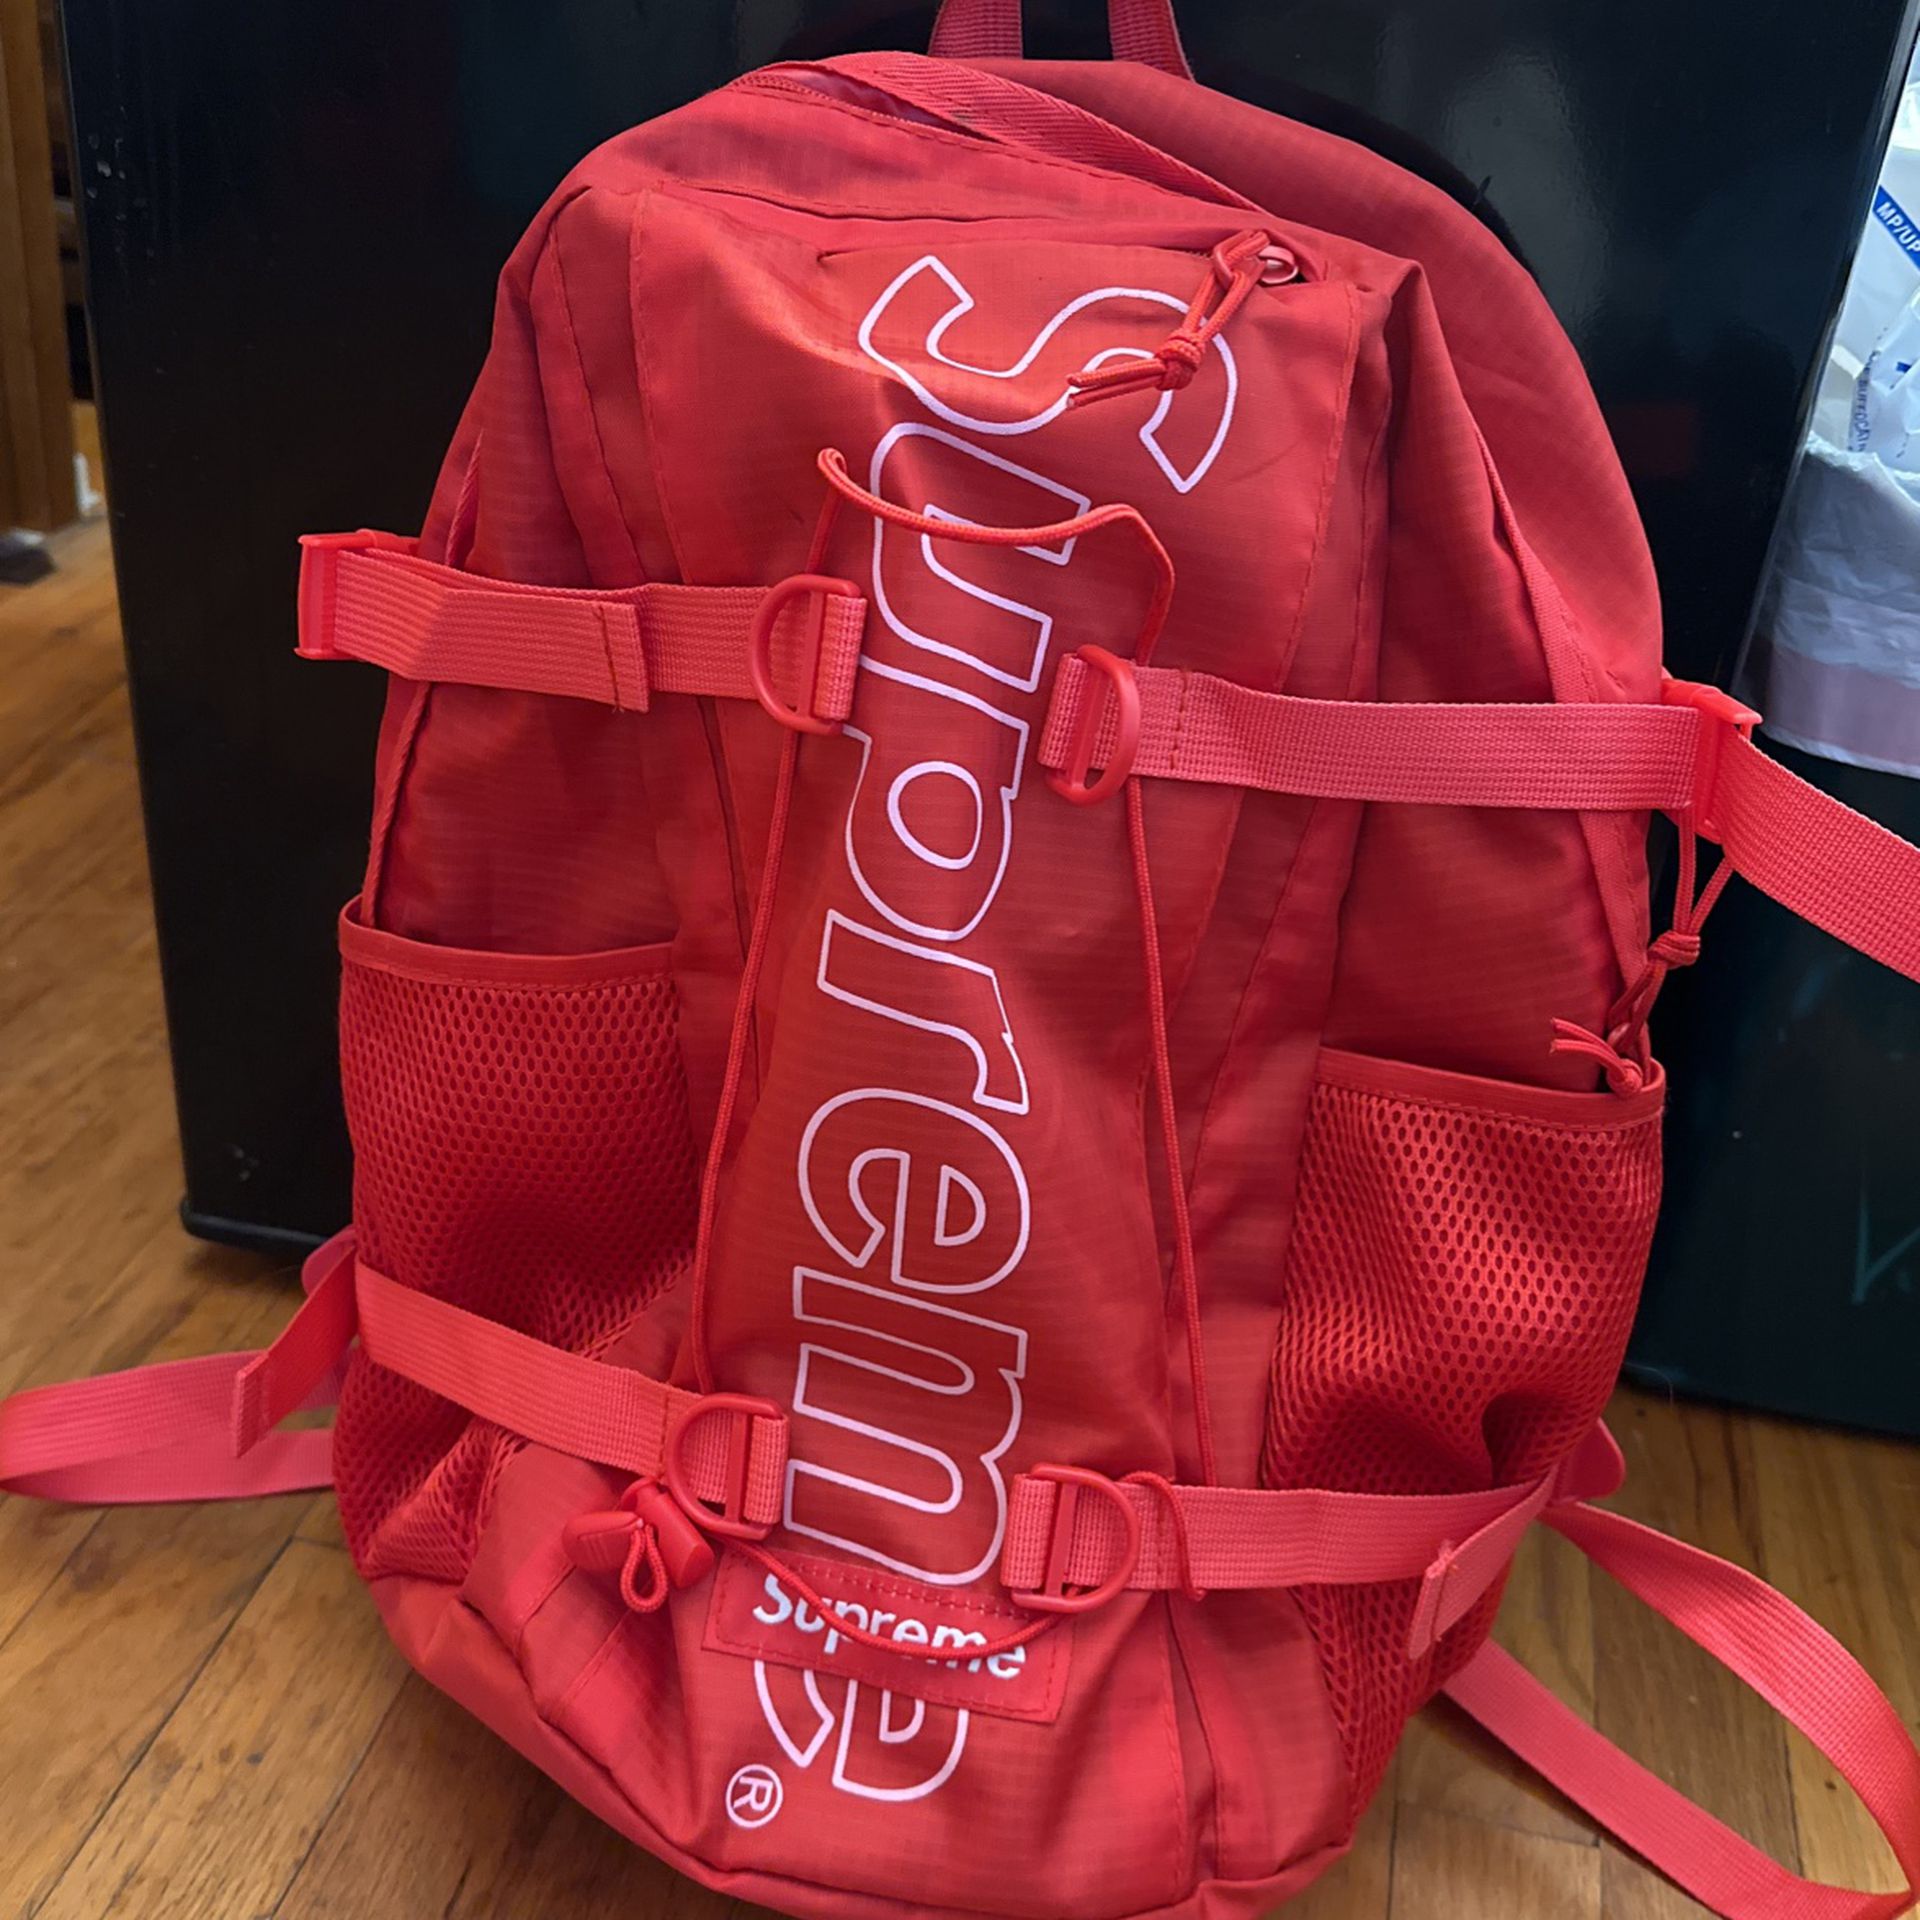 Supreme Backpack Red FW18 for Sale in Stockton, CA - OfferUp